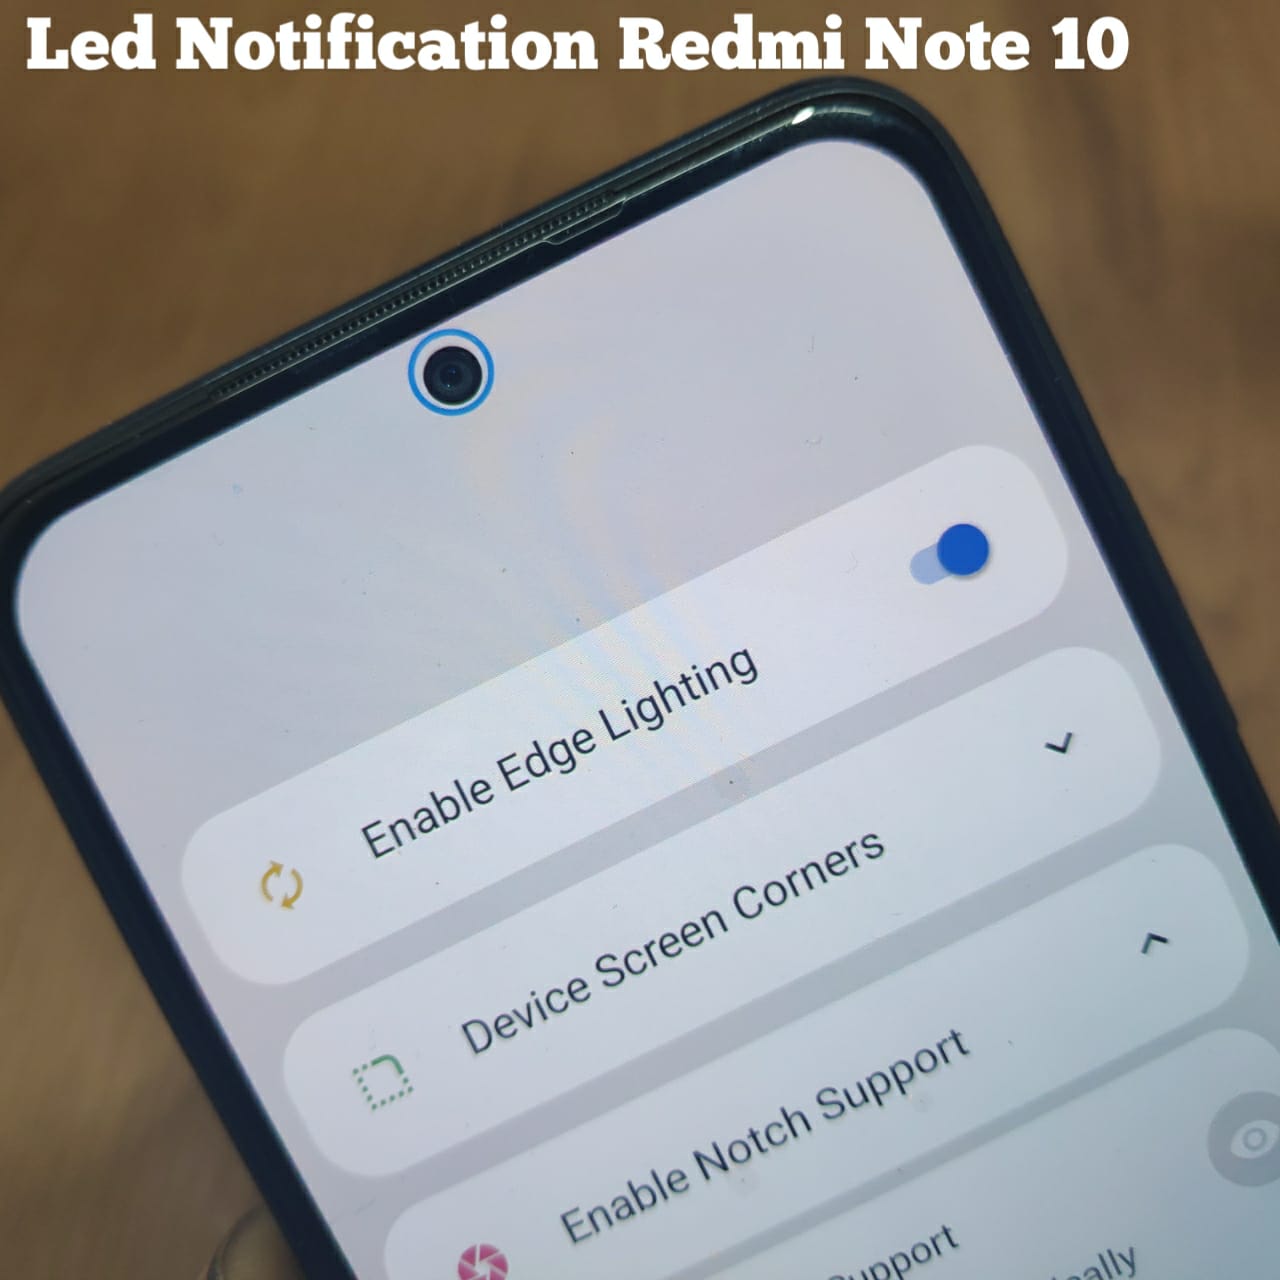 How to Enable Led Notification in Redmi Note 10